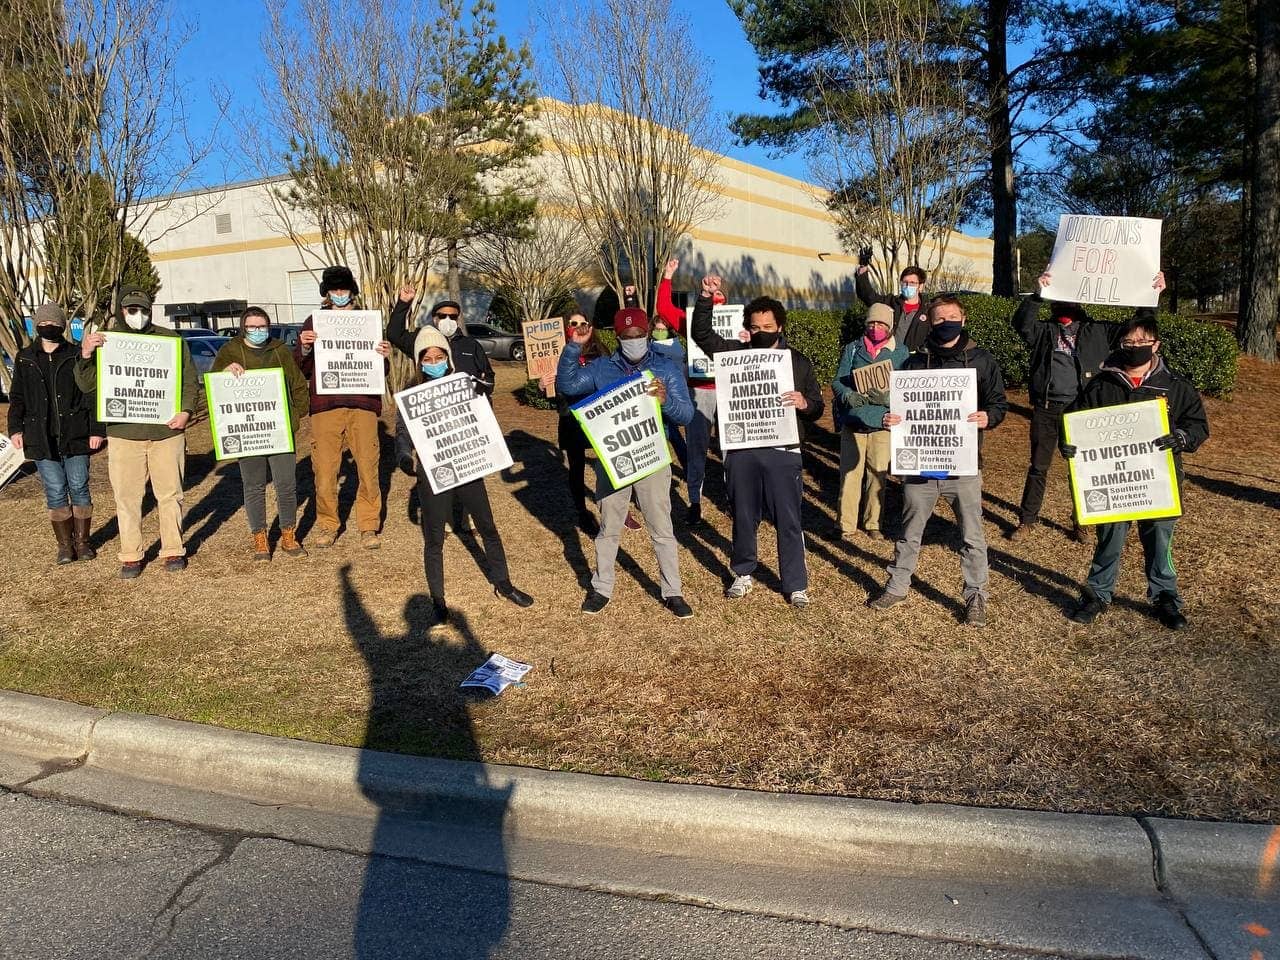 Durham-North-Carolina-Amazon-workers-support-protest-022021-1, Black Workers Matter! Nationwide protests supporting Amazon workers in Alabama from the Bay to Harlem, News & Views Photo Gallery 